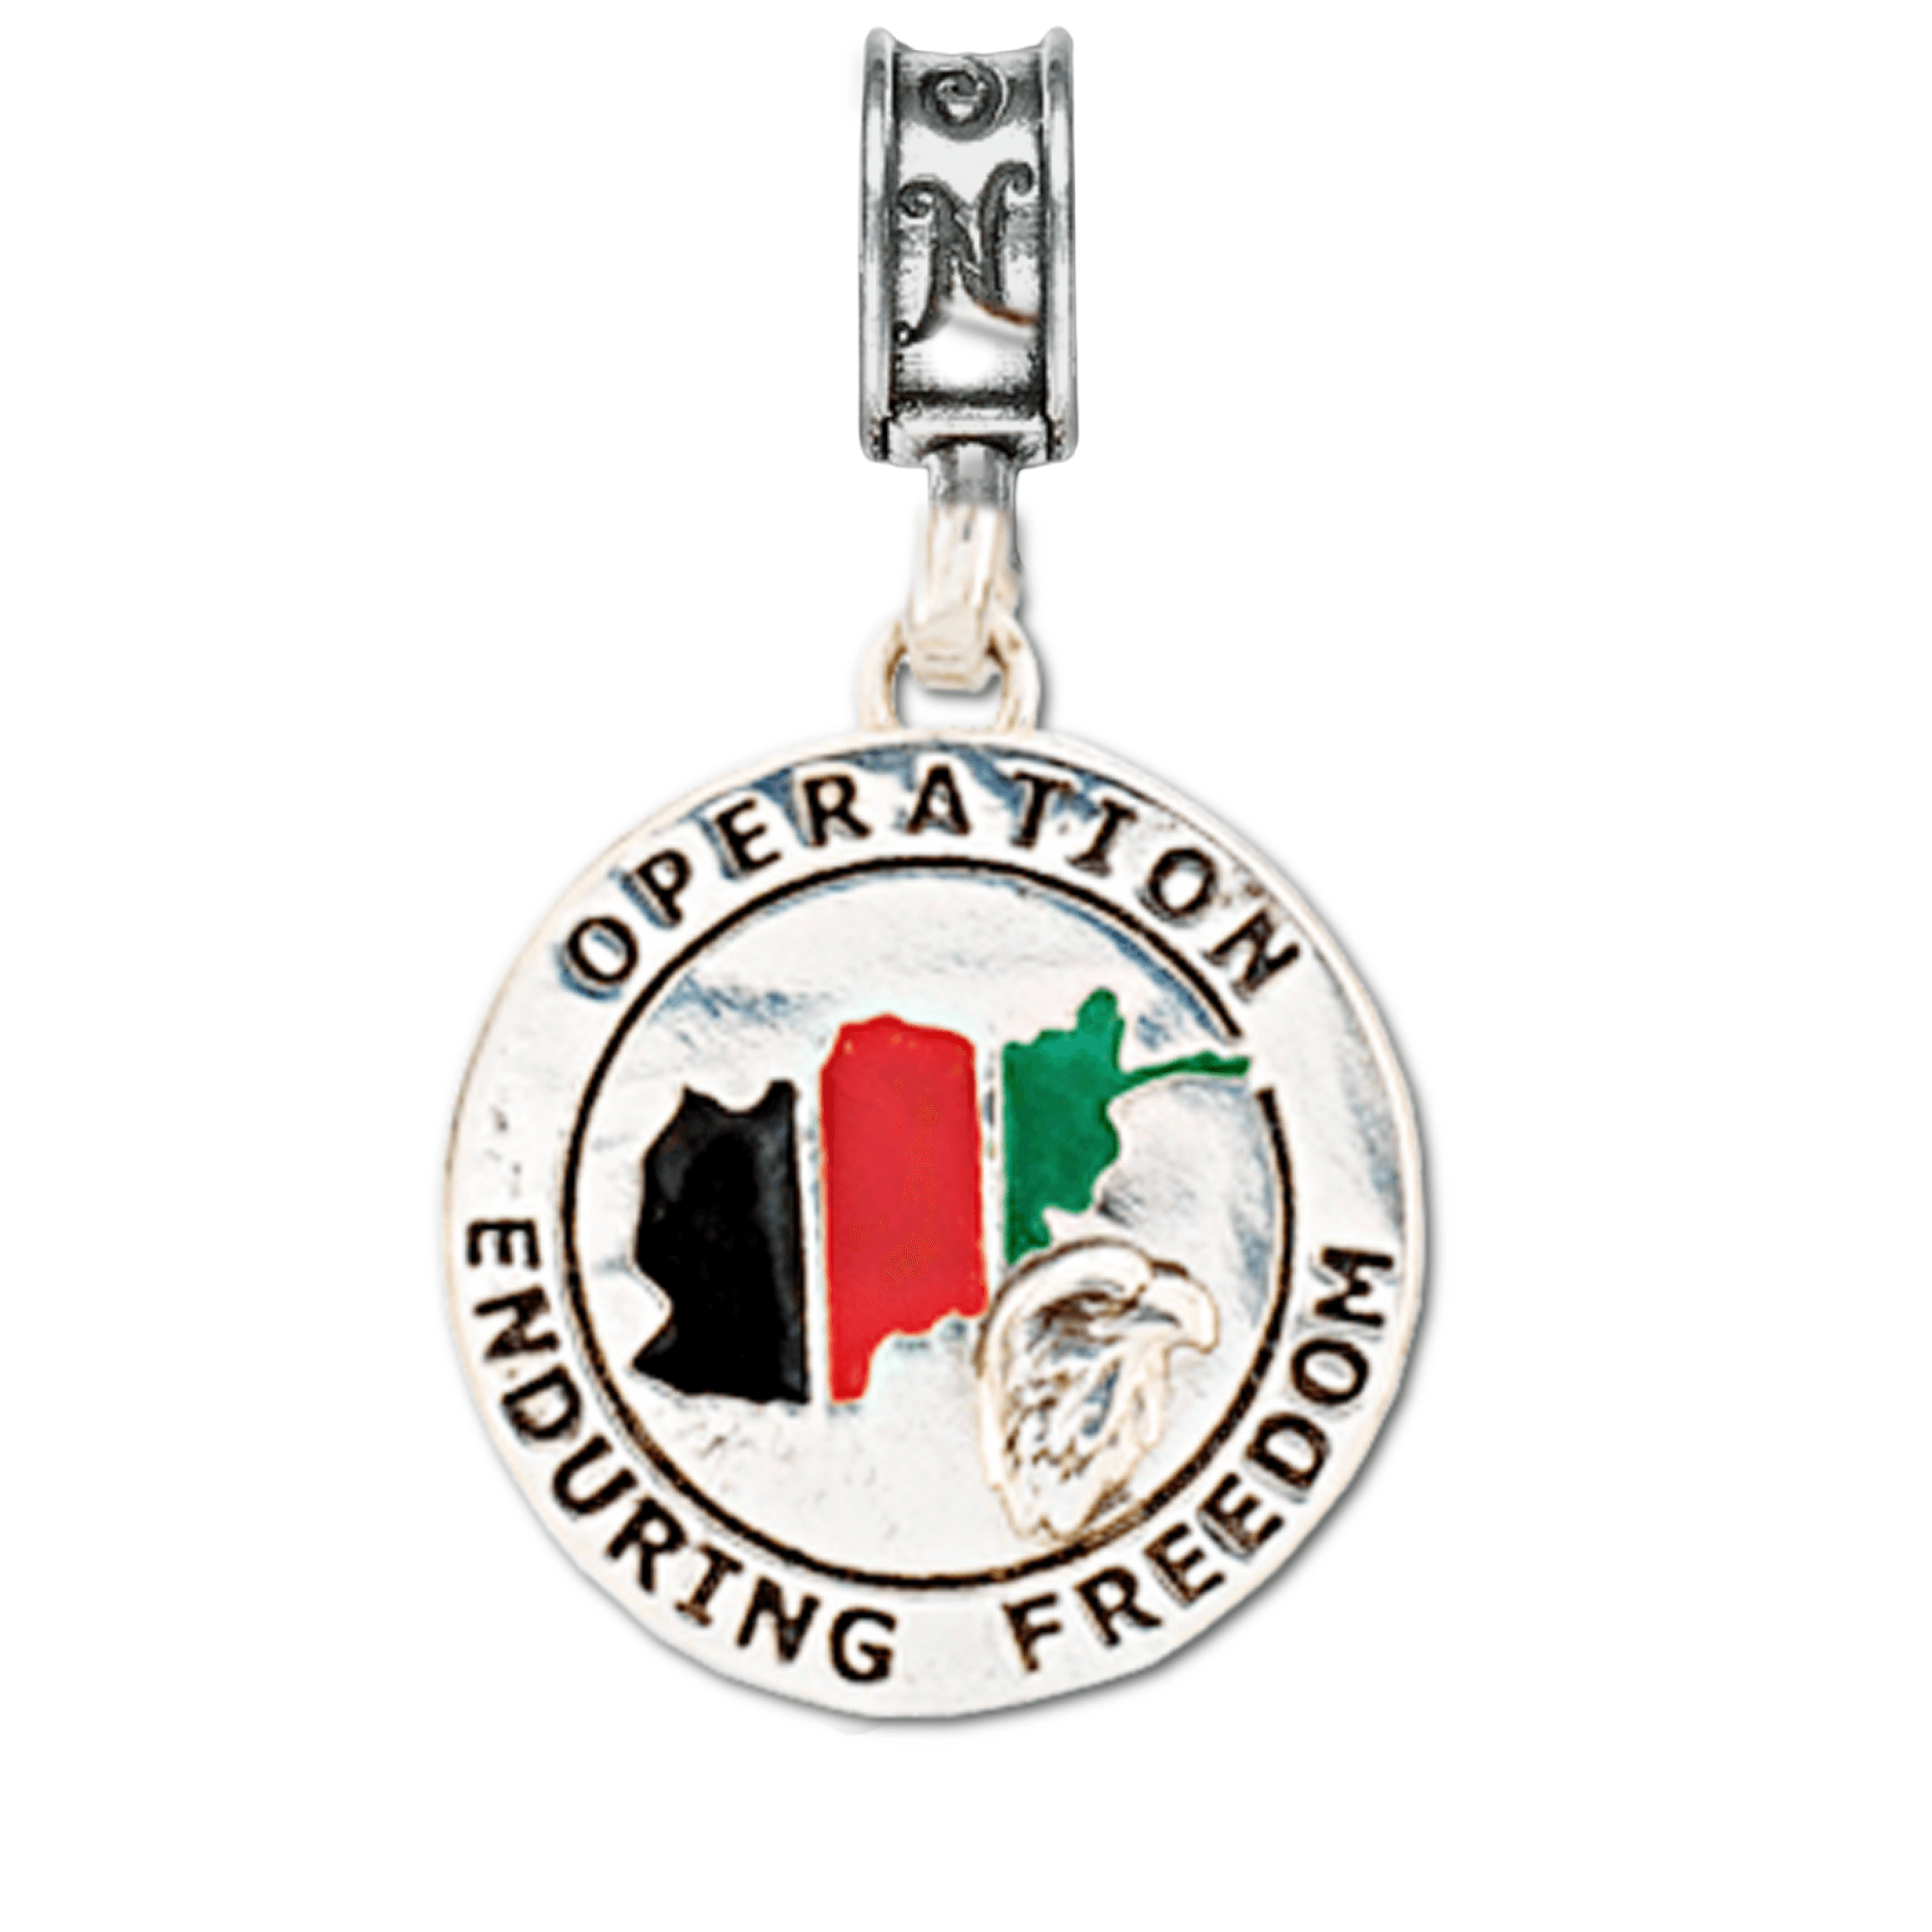 Operation Enduring Freedom, Afghanistan, OEF, military charms